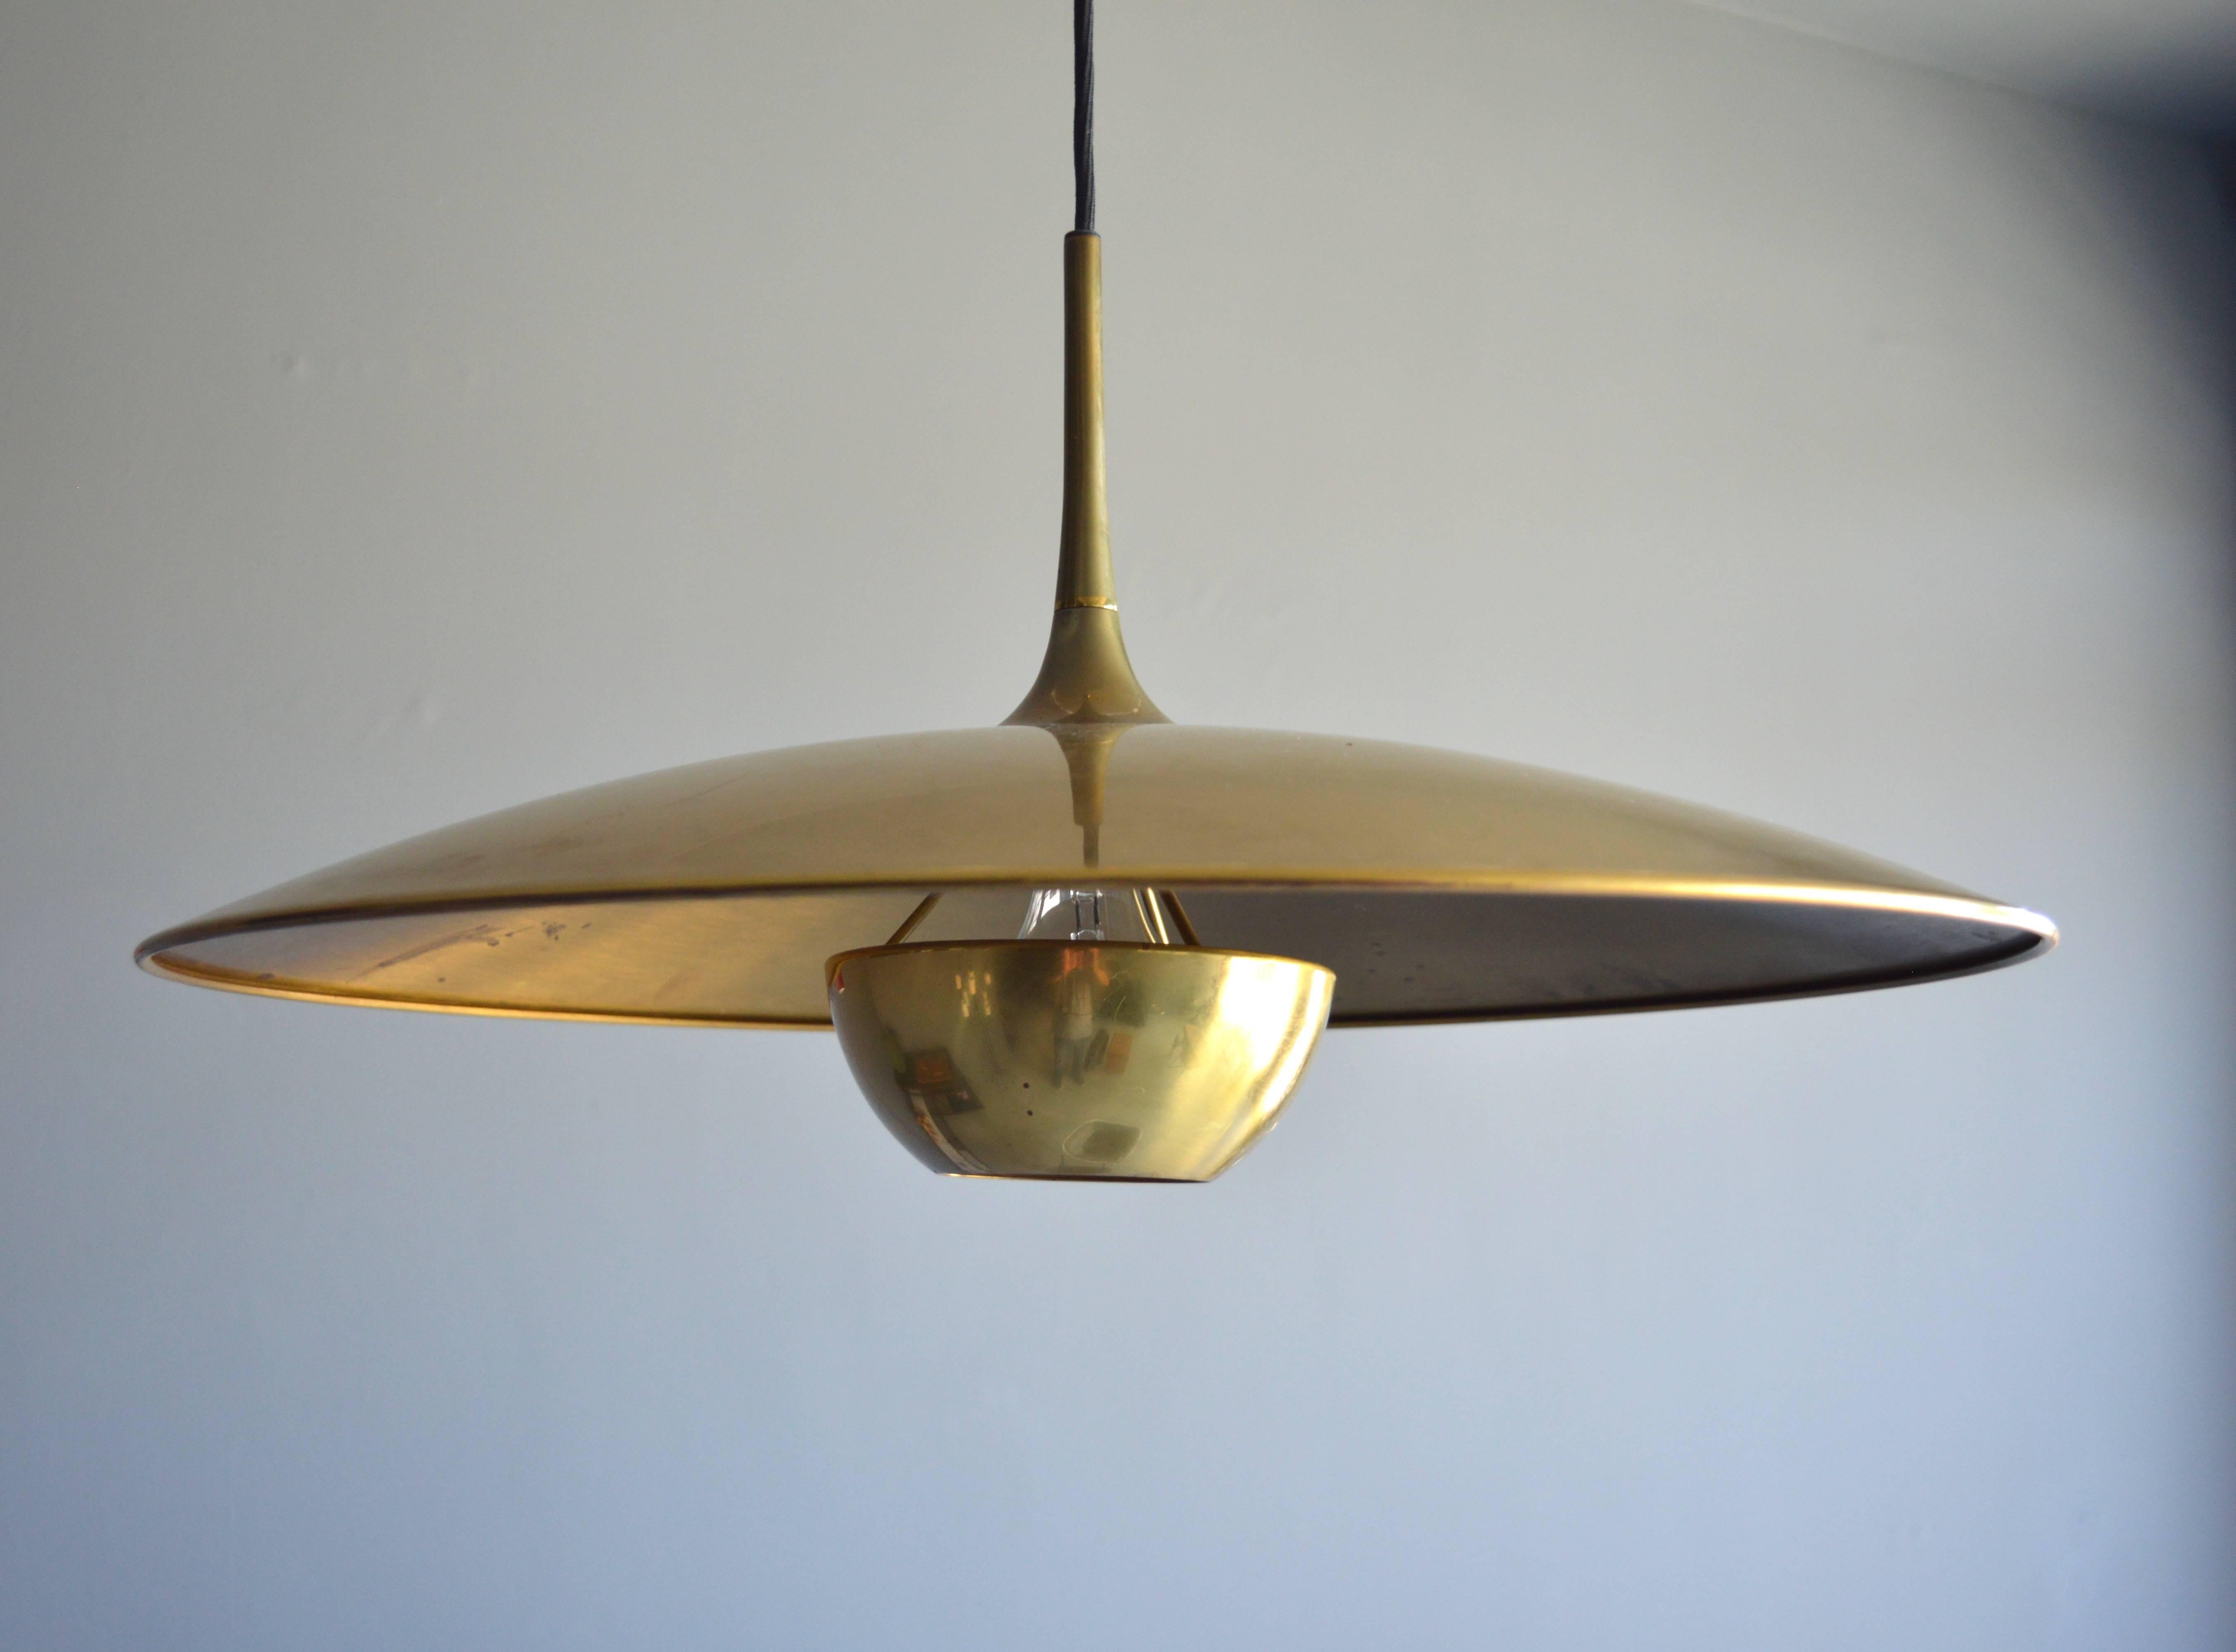 Gorgeous brass counter balance pendant by German lighting manufacturer Florian Schulz. Brass ball canopy, heavy brass ball counter-weight and brass disc. Cloth cord. Great patina to brass. Scratches throughout. Excellent vintage condition. Overall